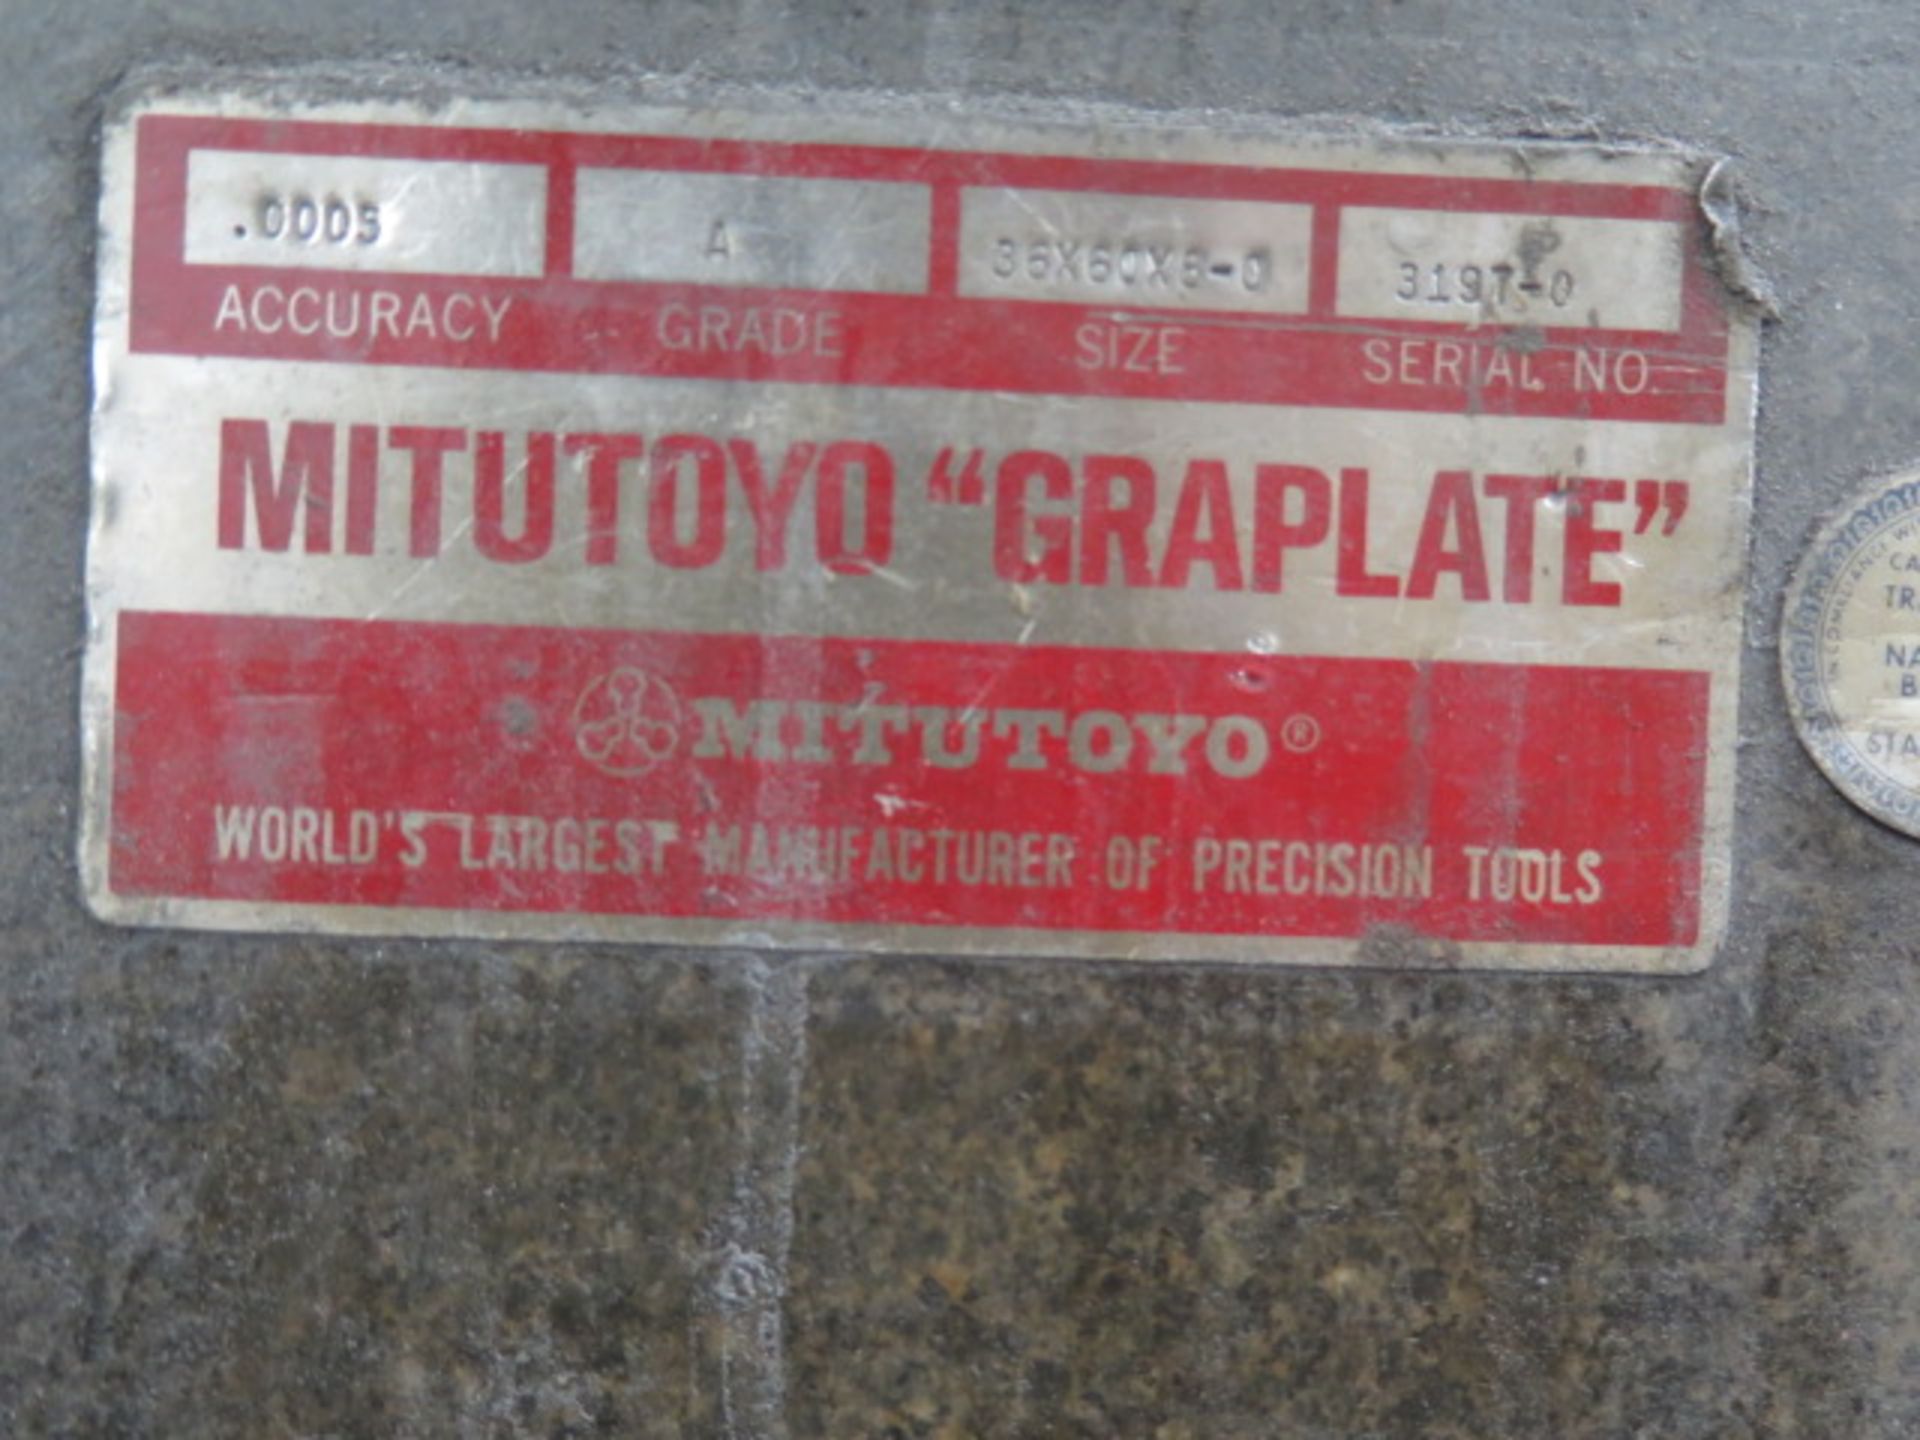 Mitutoyo 36” x 60” x 8 ½” Grade “A” Granite Surface Plate w/ Stand - Image 4 of 4